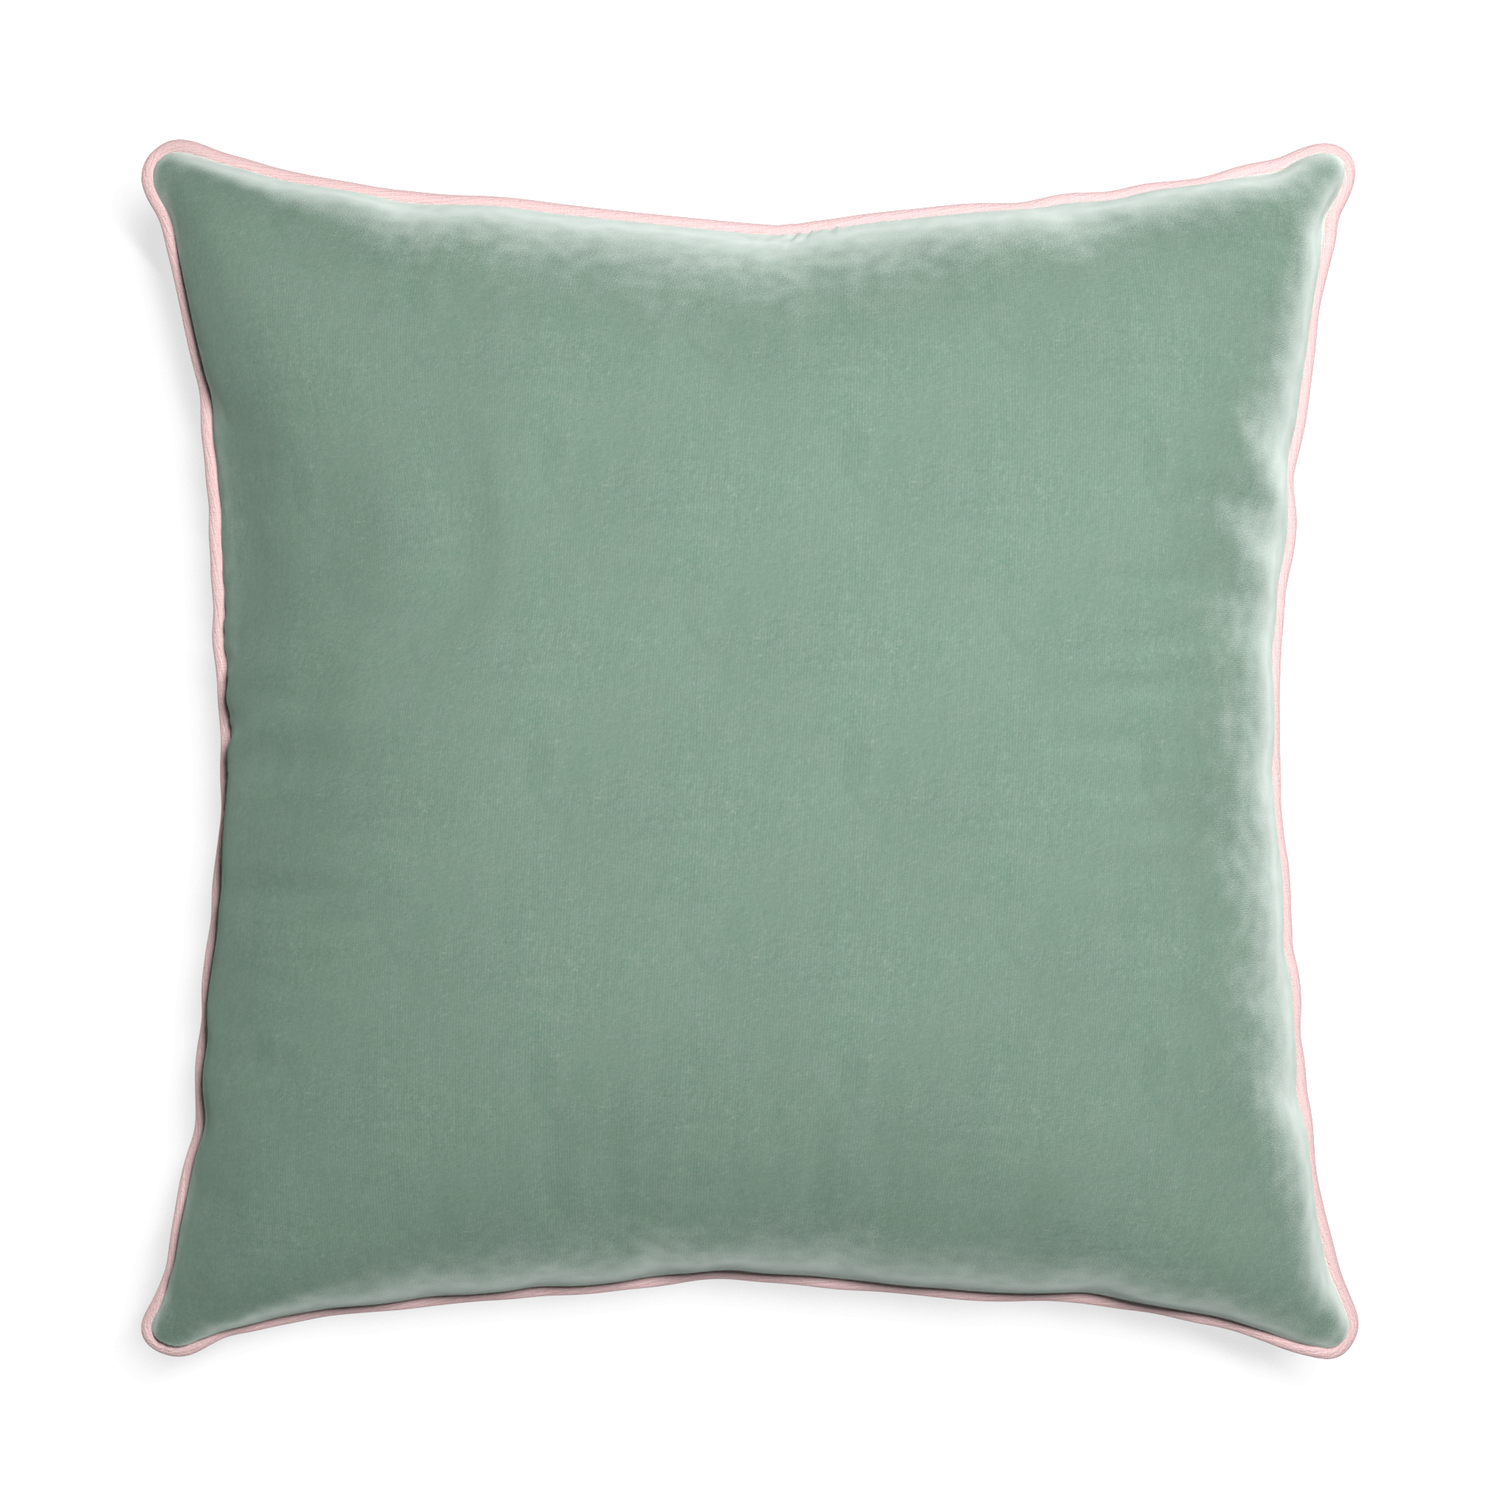 square blue green velvet pillow with light pink piping